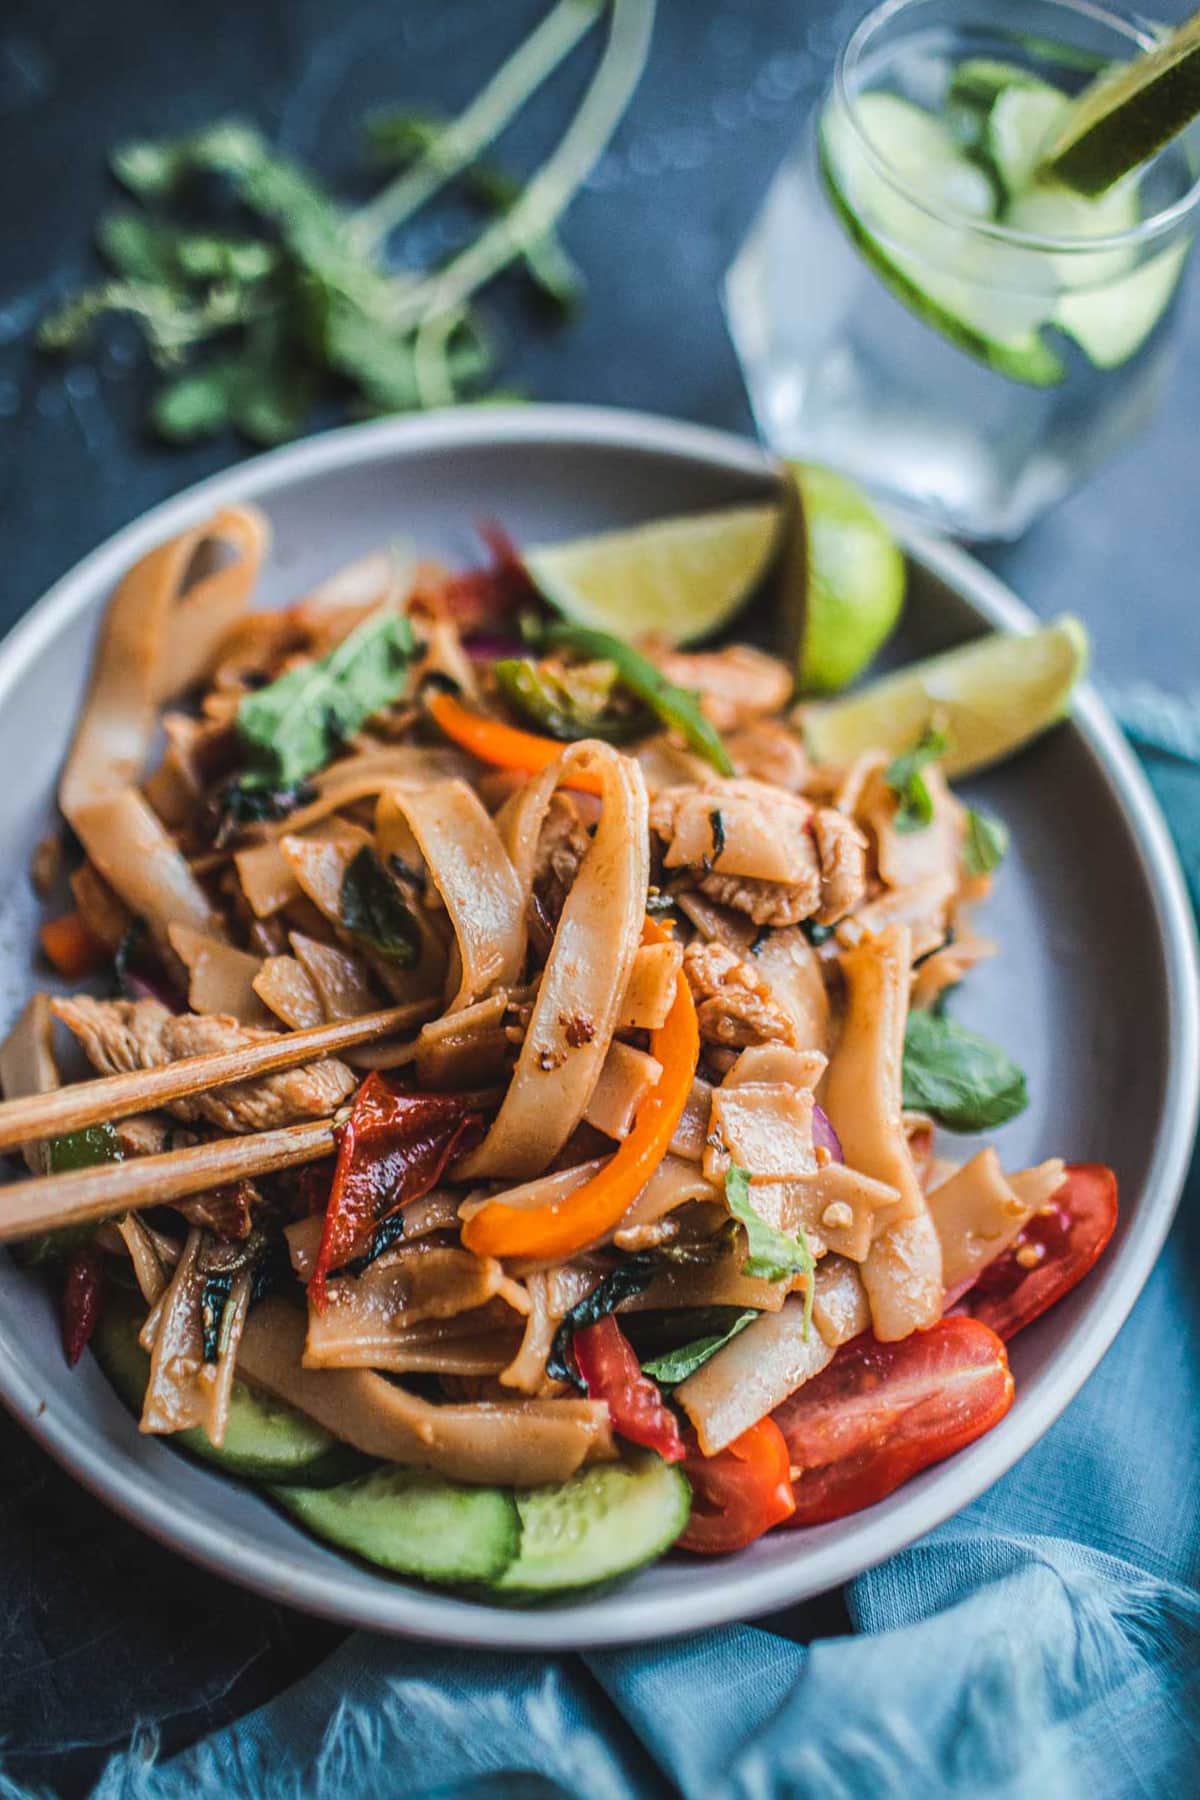 Thai Drunken Noodles are not only the perfect hangover cure, but these saucy stir-fried rice noodles are a fast, easy, 30-minute weeknight dinner! Full of umami flavor, make it with chicken, shrimp or crispy tofu! 